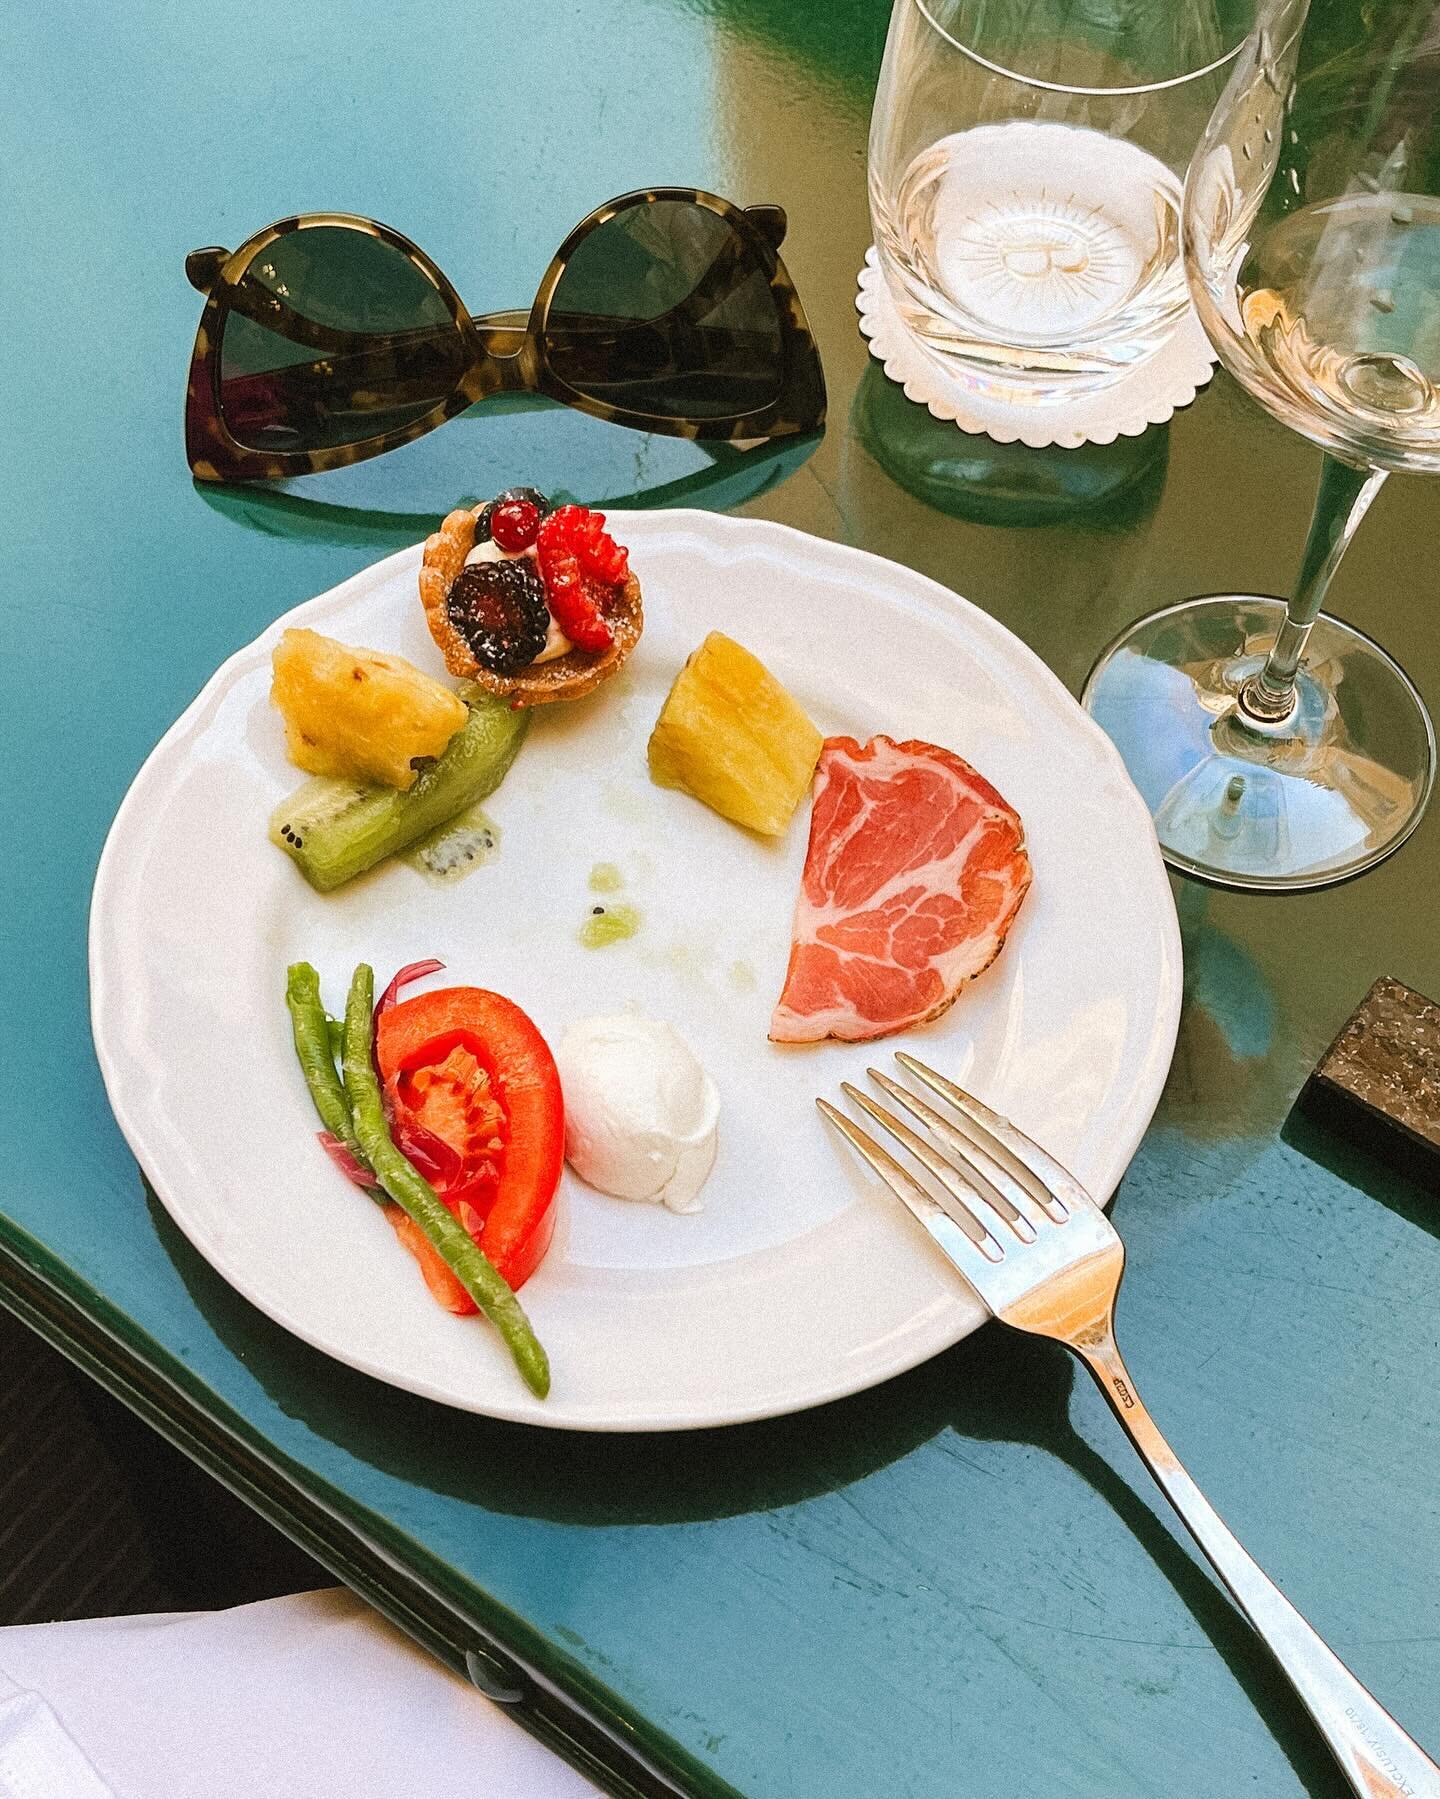 Account of a perfect, sunny Sunday in the beginning of February.

Beautiful brunch by @sanbaylonroma at @palazzoripettarome.

#romanity #sundaybrunch #wheninrome